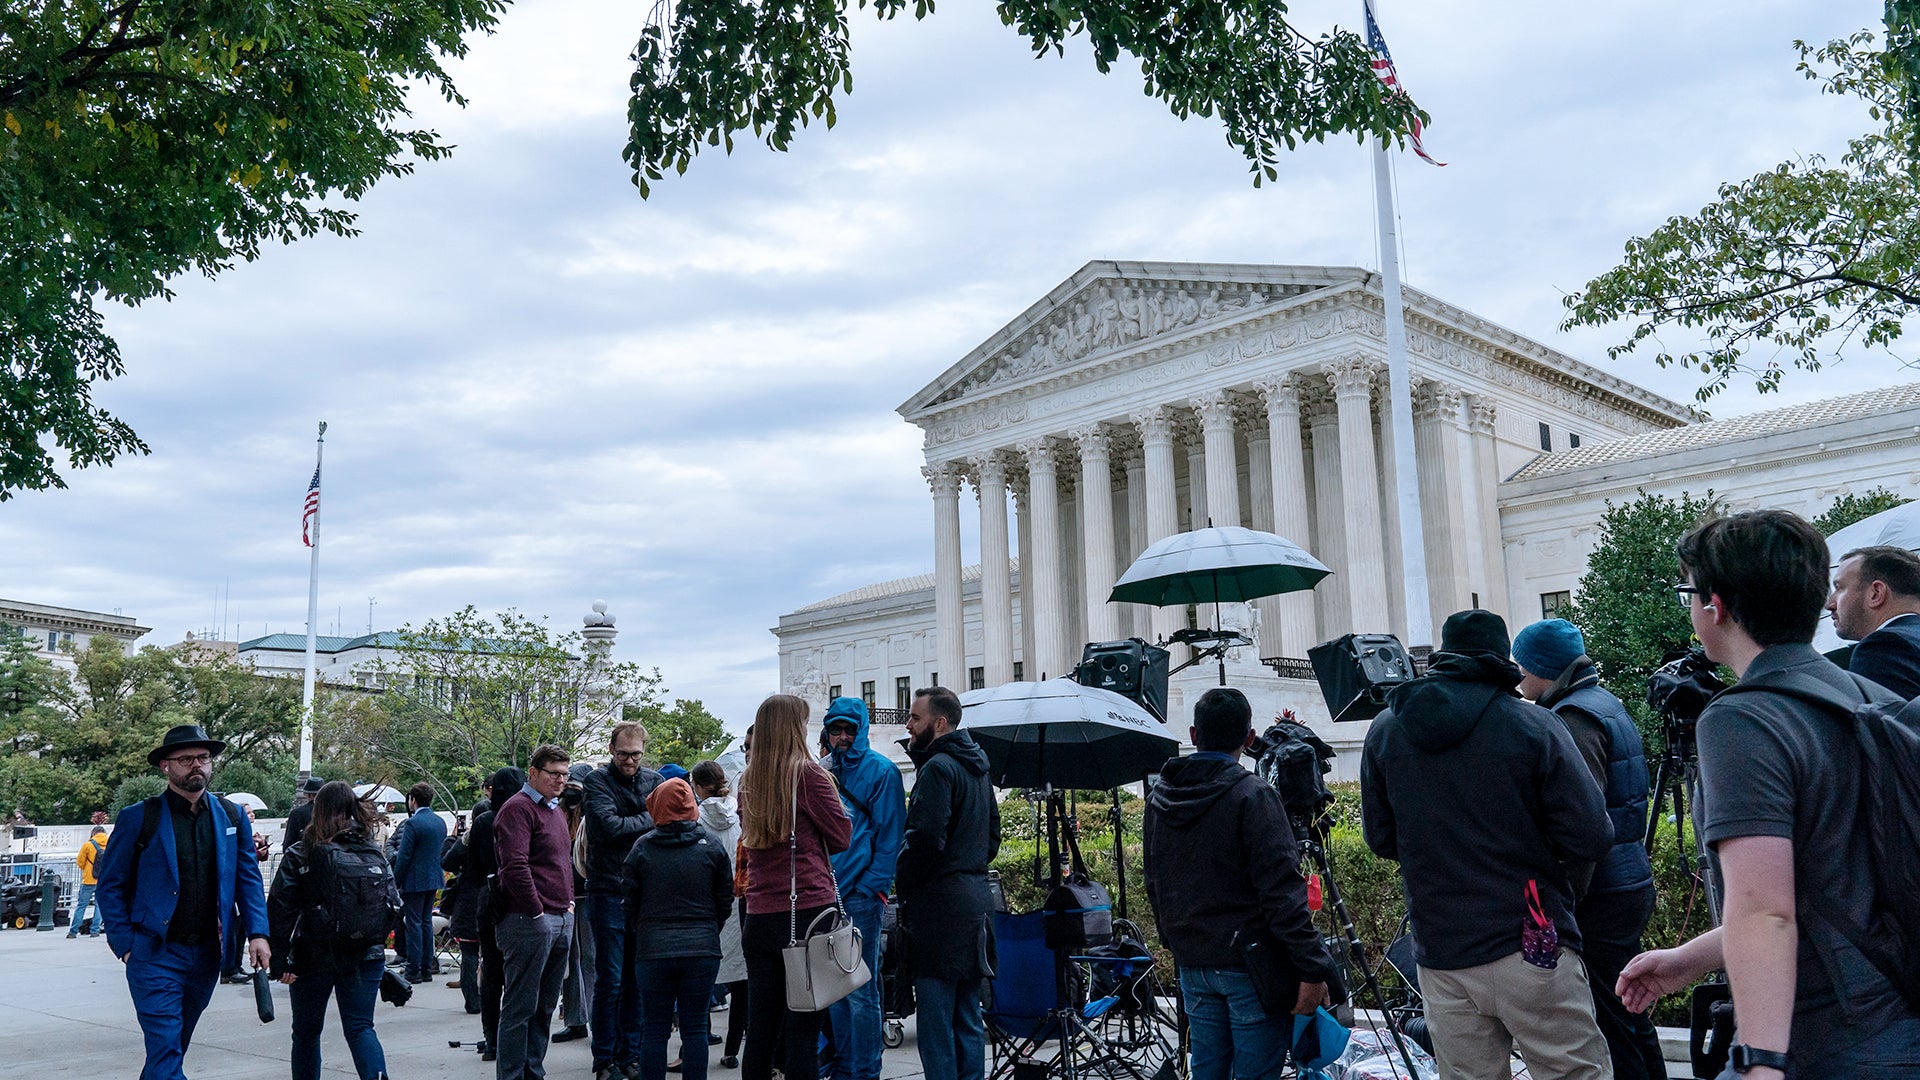 Religious Liberty On The Docket Us Supreme Court Starts New Term With Doors Open To The Public 